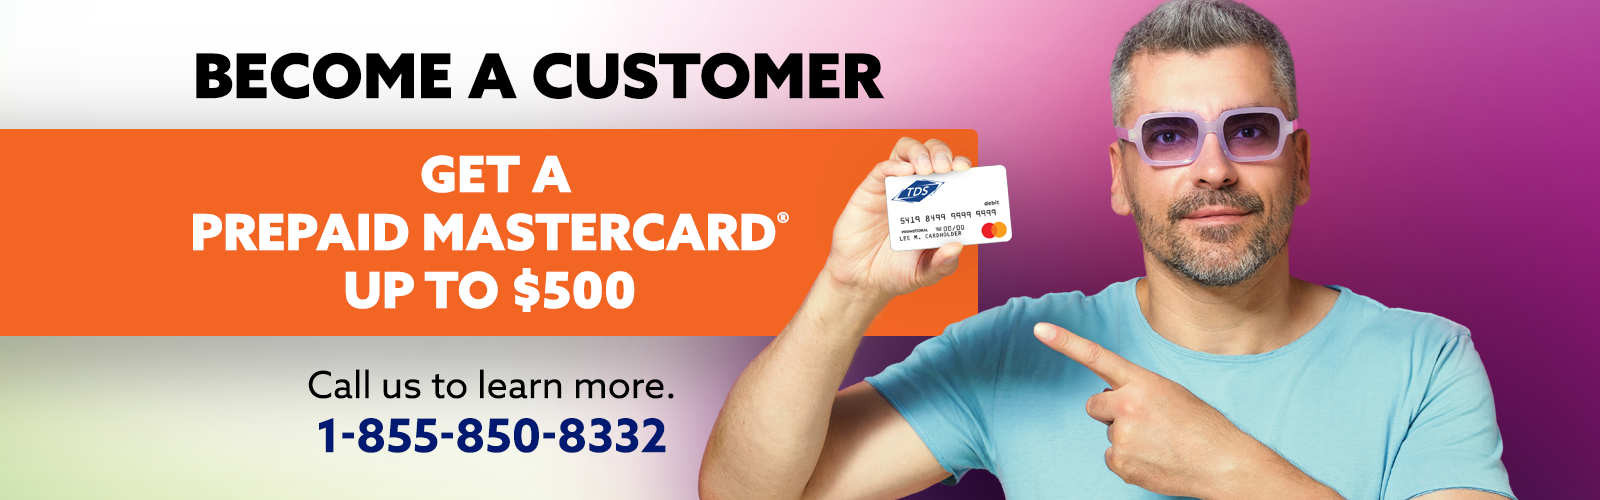 Become a Customer and Get a Prepaid Mastercard Up to $500. Call 1-855-850-8332 to learn more